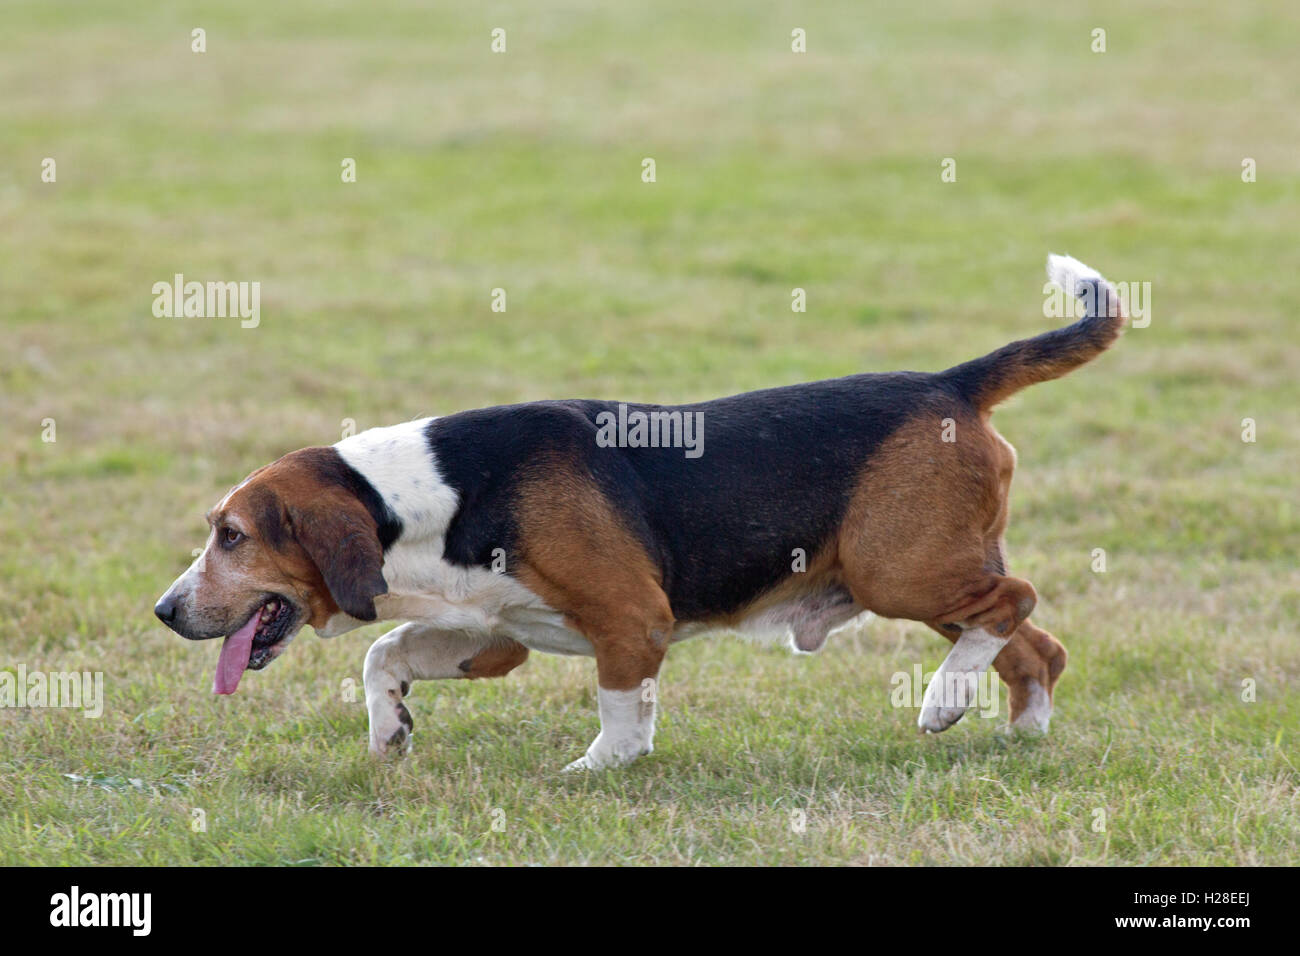 Basset Hound (Canis lupus familiaris). Pack animals bred to hunt Brown Hares (Lepus europaeus) in the field. Stock Photo